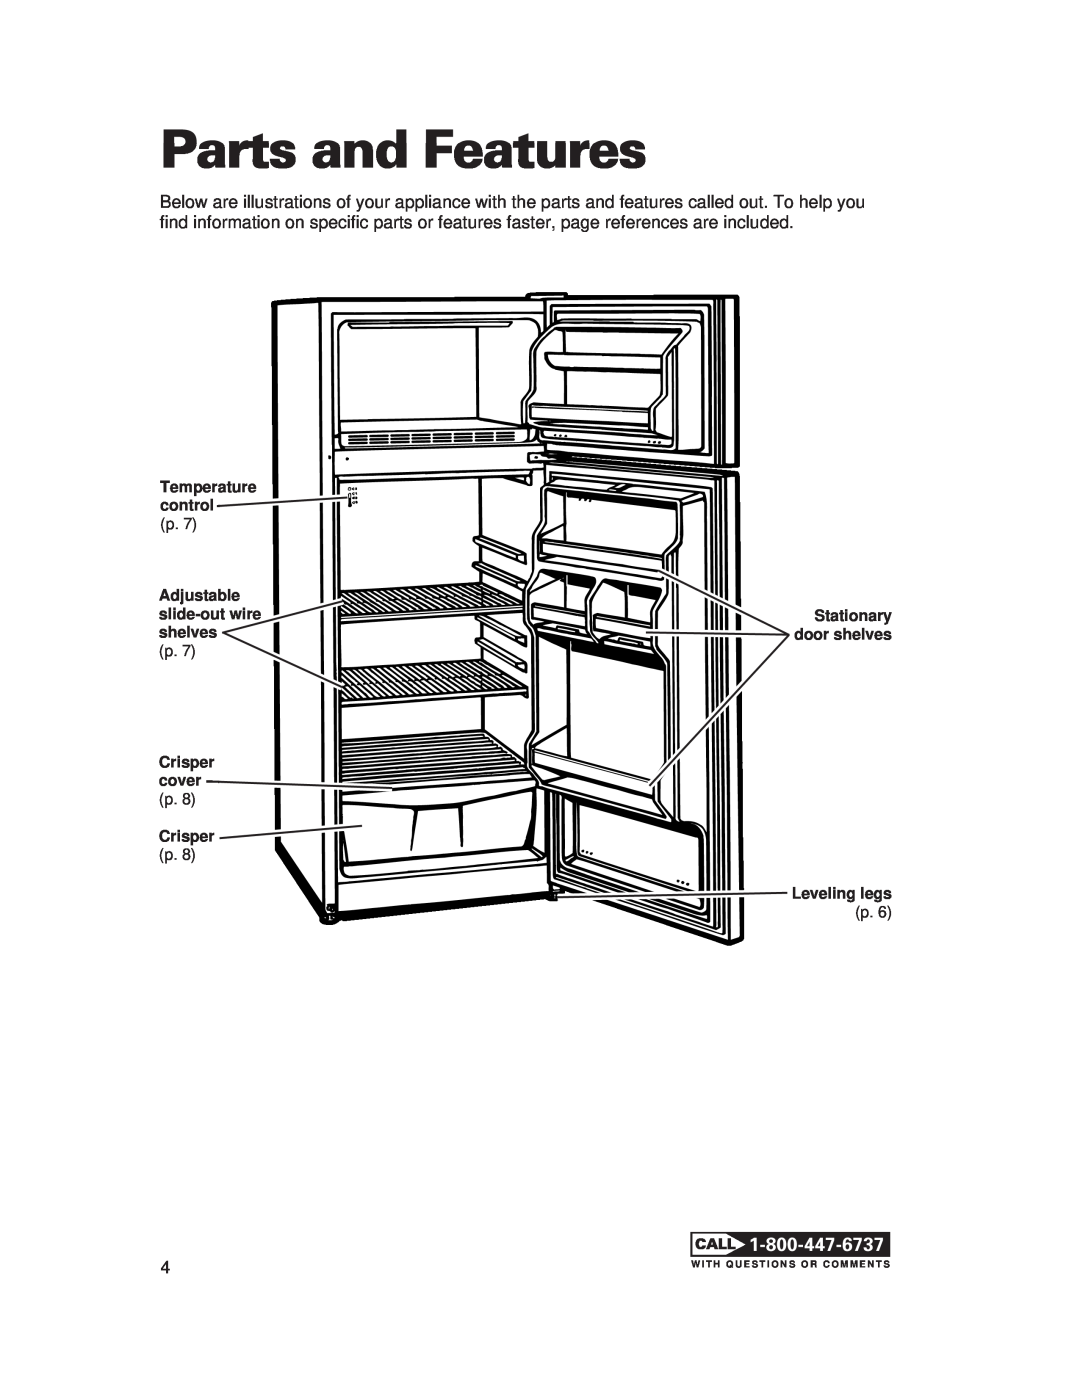 Whirlpool 1-34850/4390527 Parts and Features, Temperature control p Adjustable slide-out wire shelves, Crisper cover 